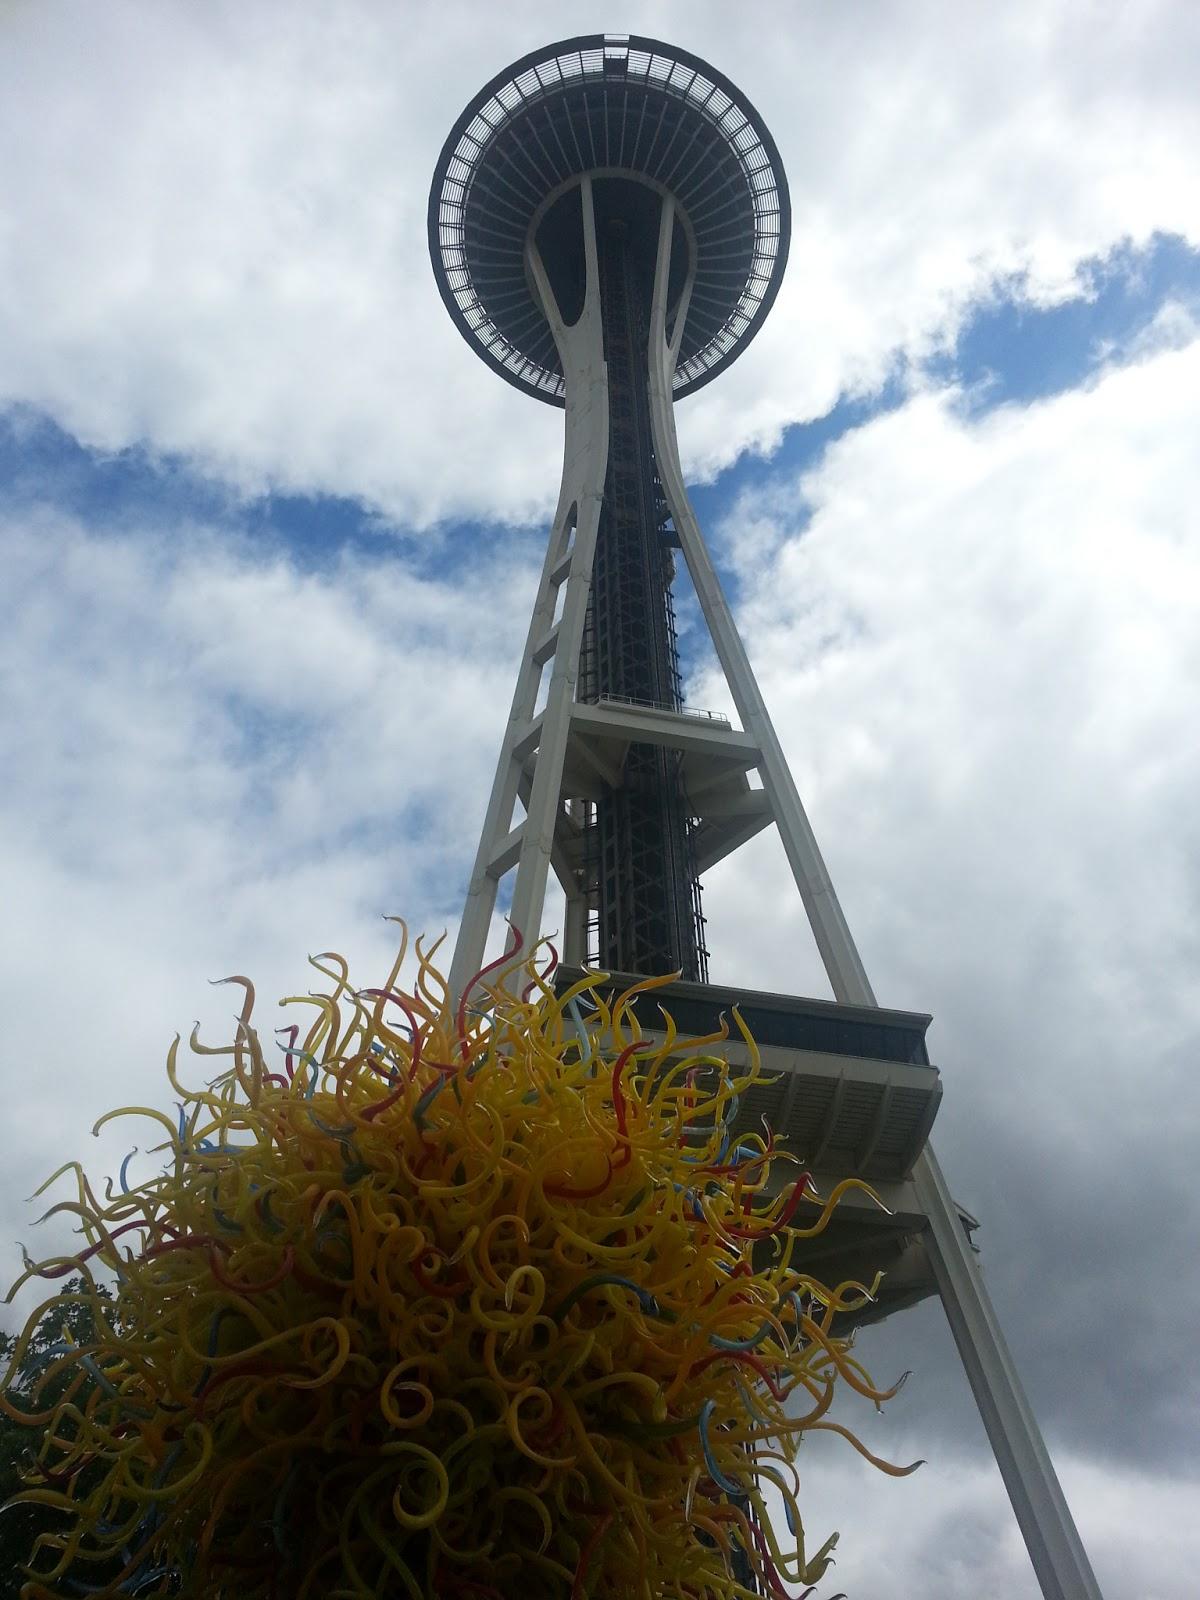 Ladycation in Seattle: A Reunion Weekend